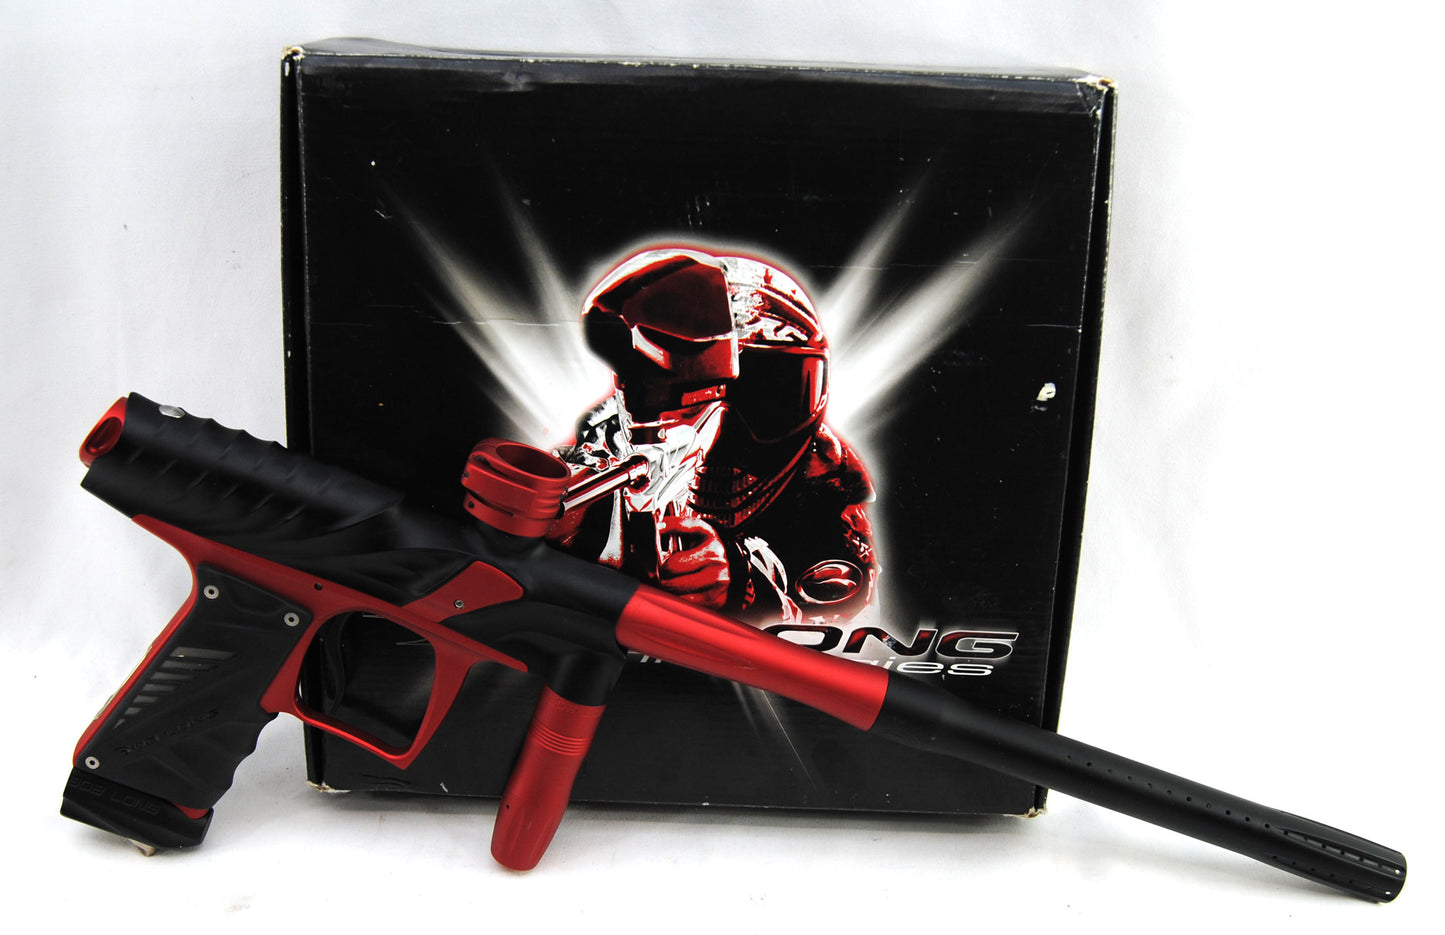 Used Bob Long Insight Paintball Marker - Black/Red